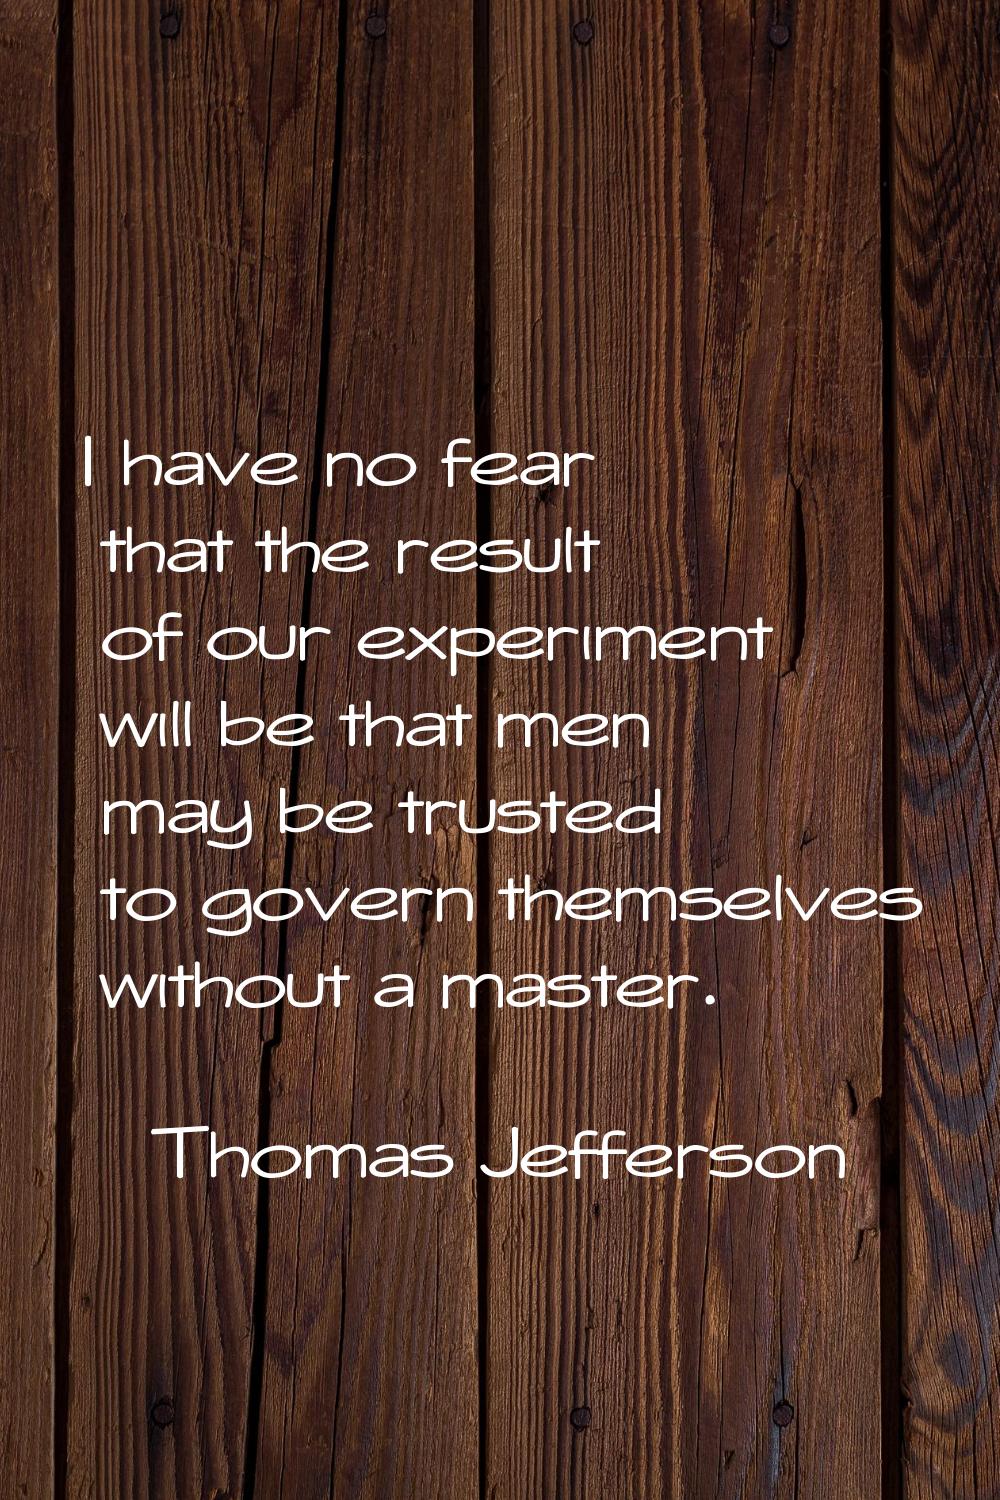 I have no fear that the result of our experiment will be that men may be trusted to govern themselv